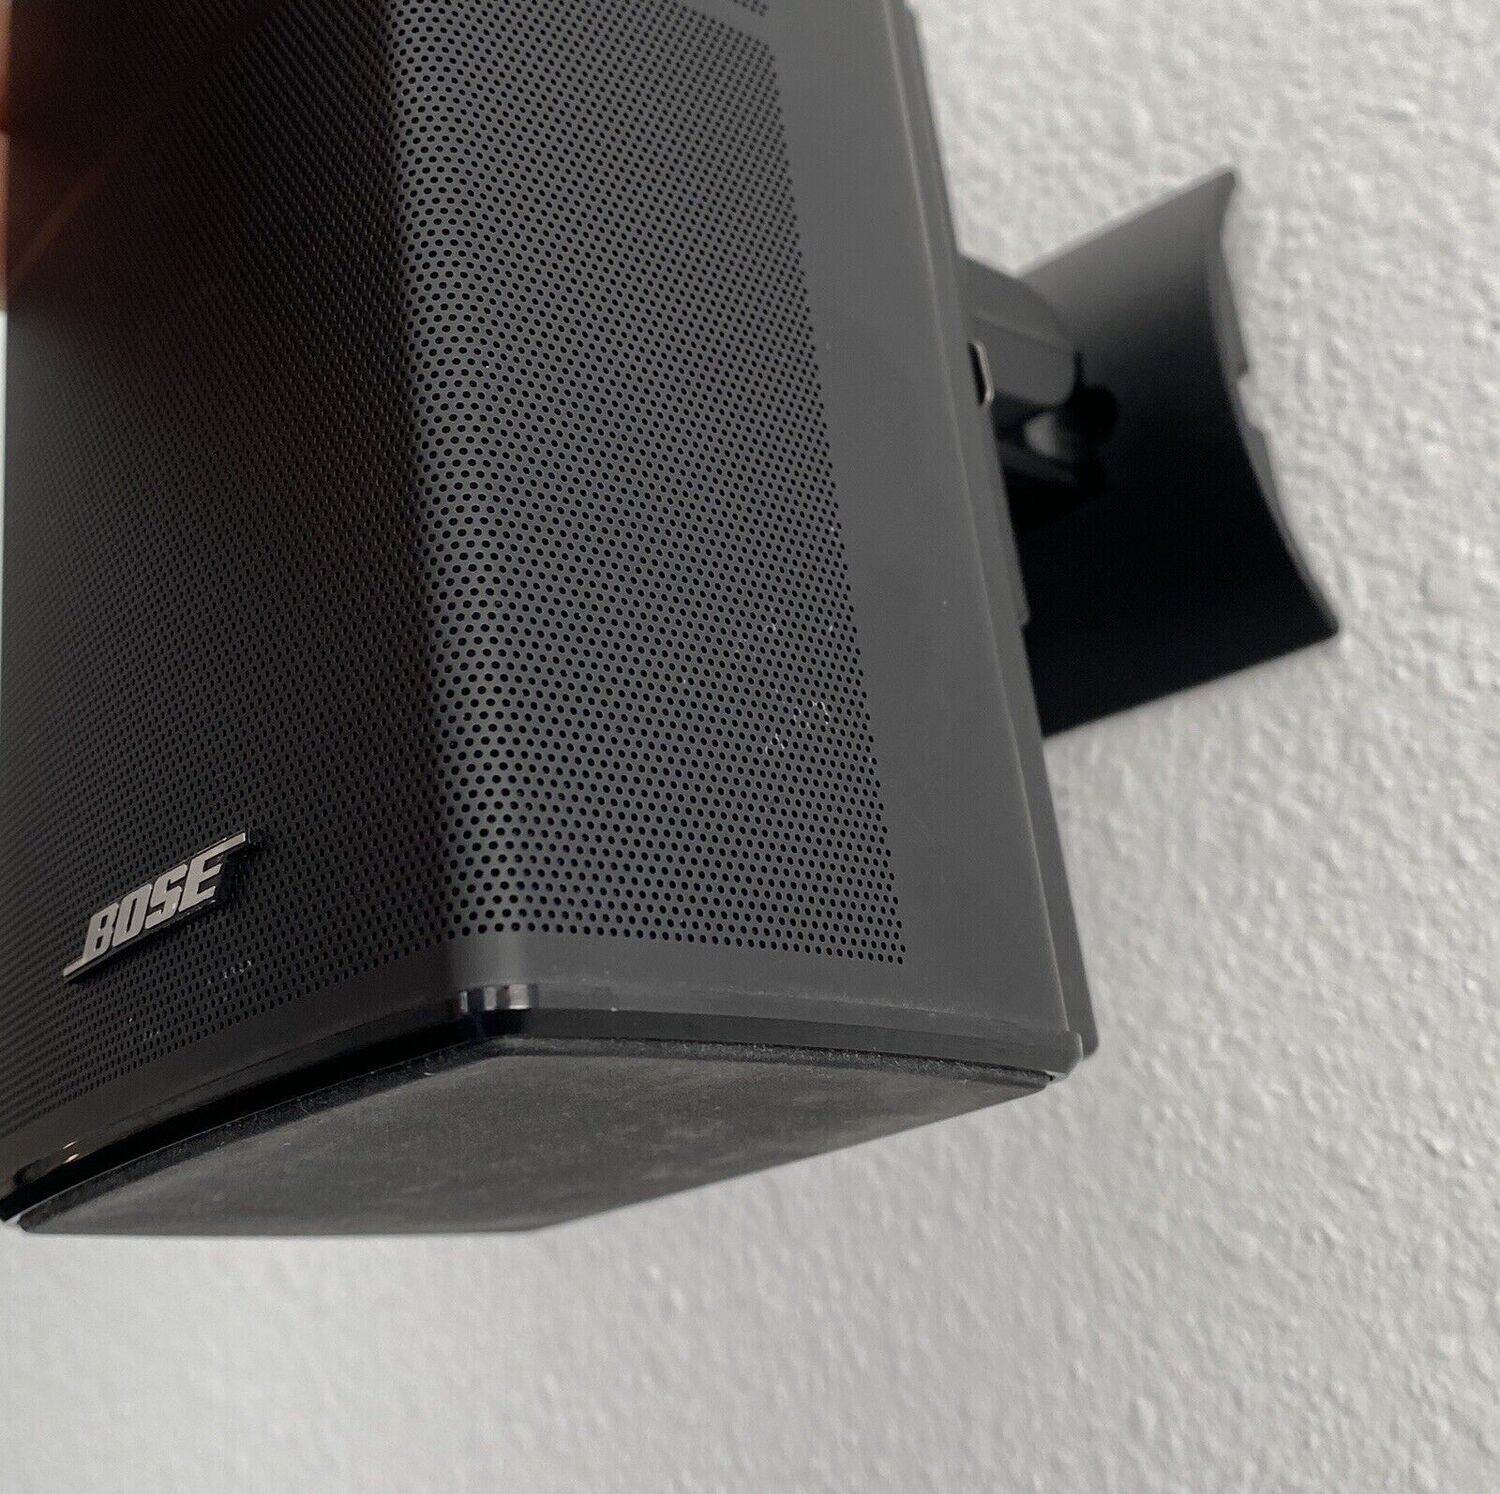 Metal Wall Mount bracket For Bose Lifestyle 600 - Virtually Invisible 300 - Black Single